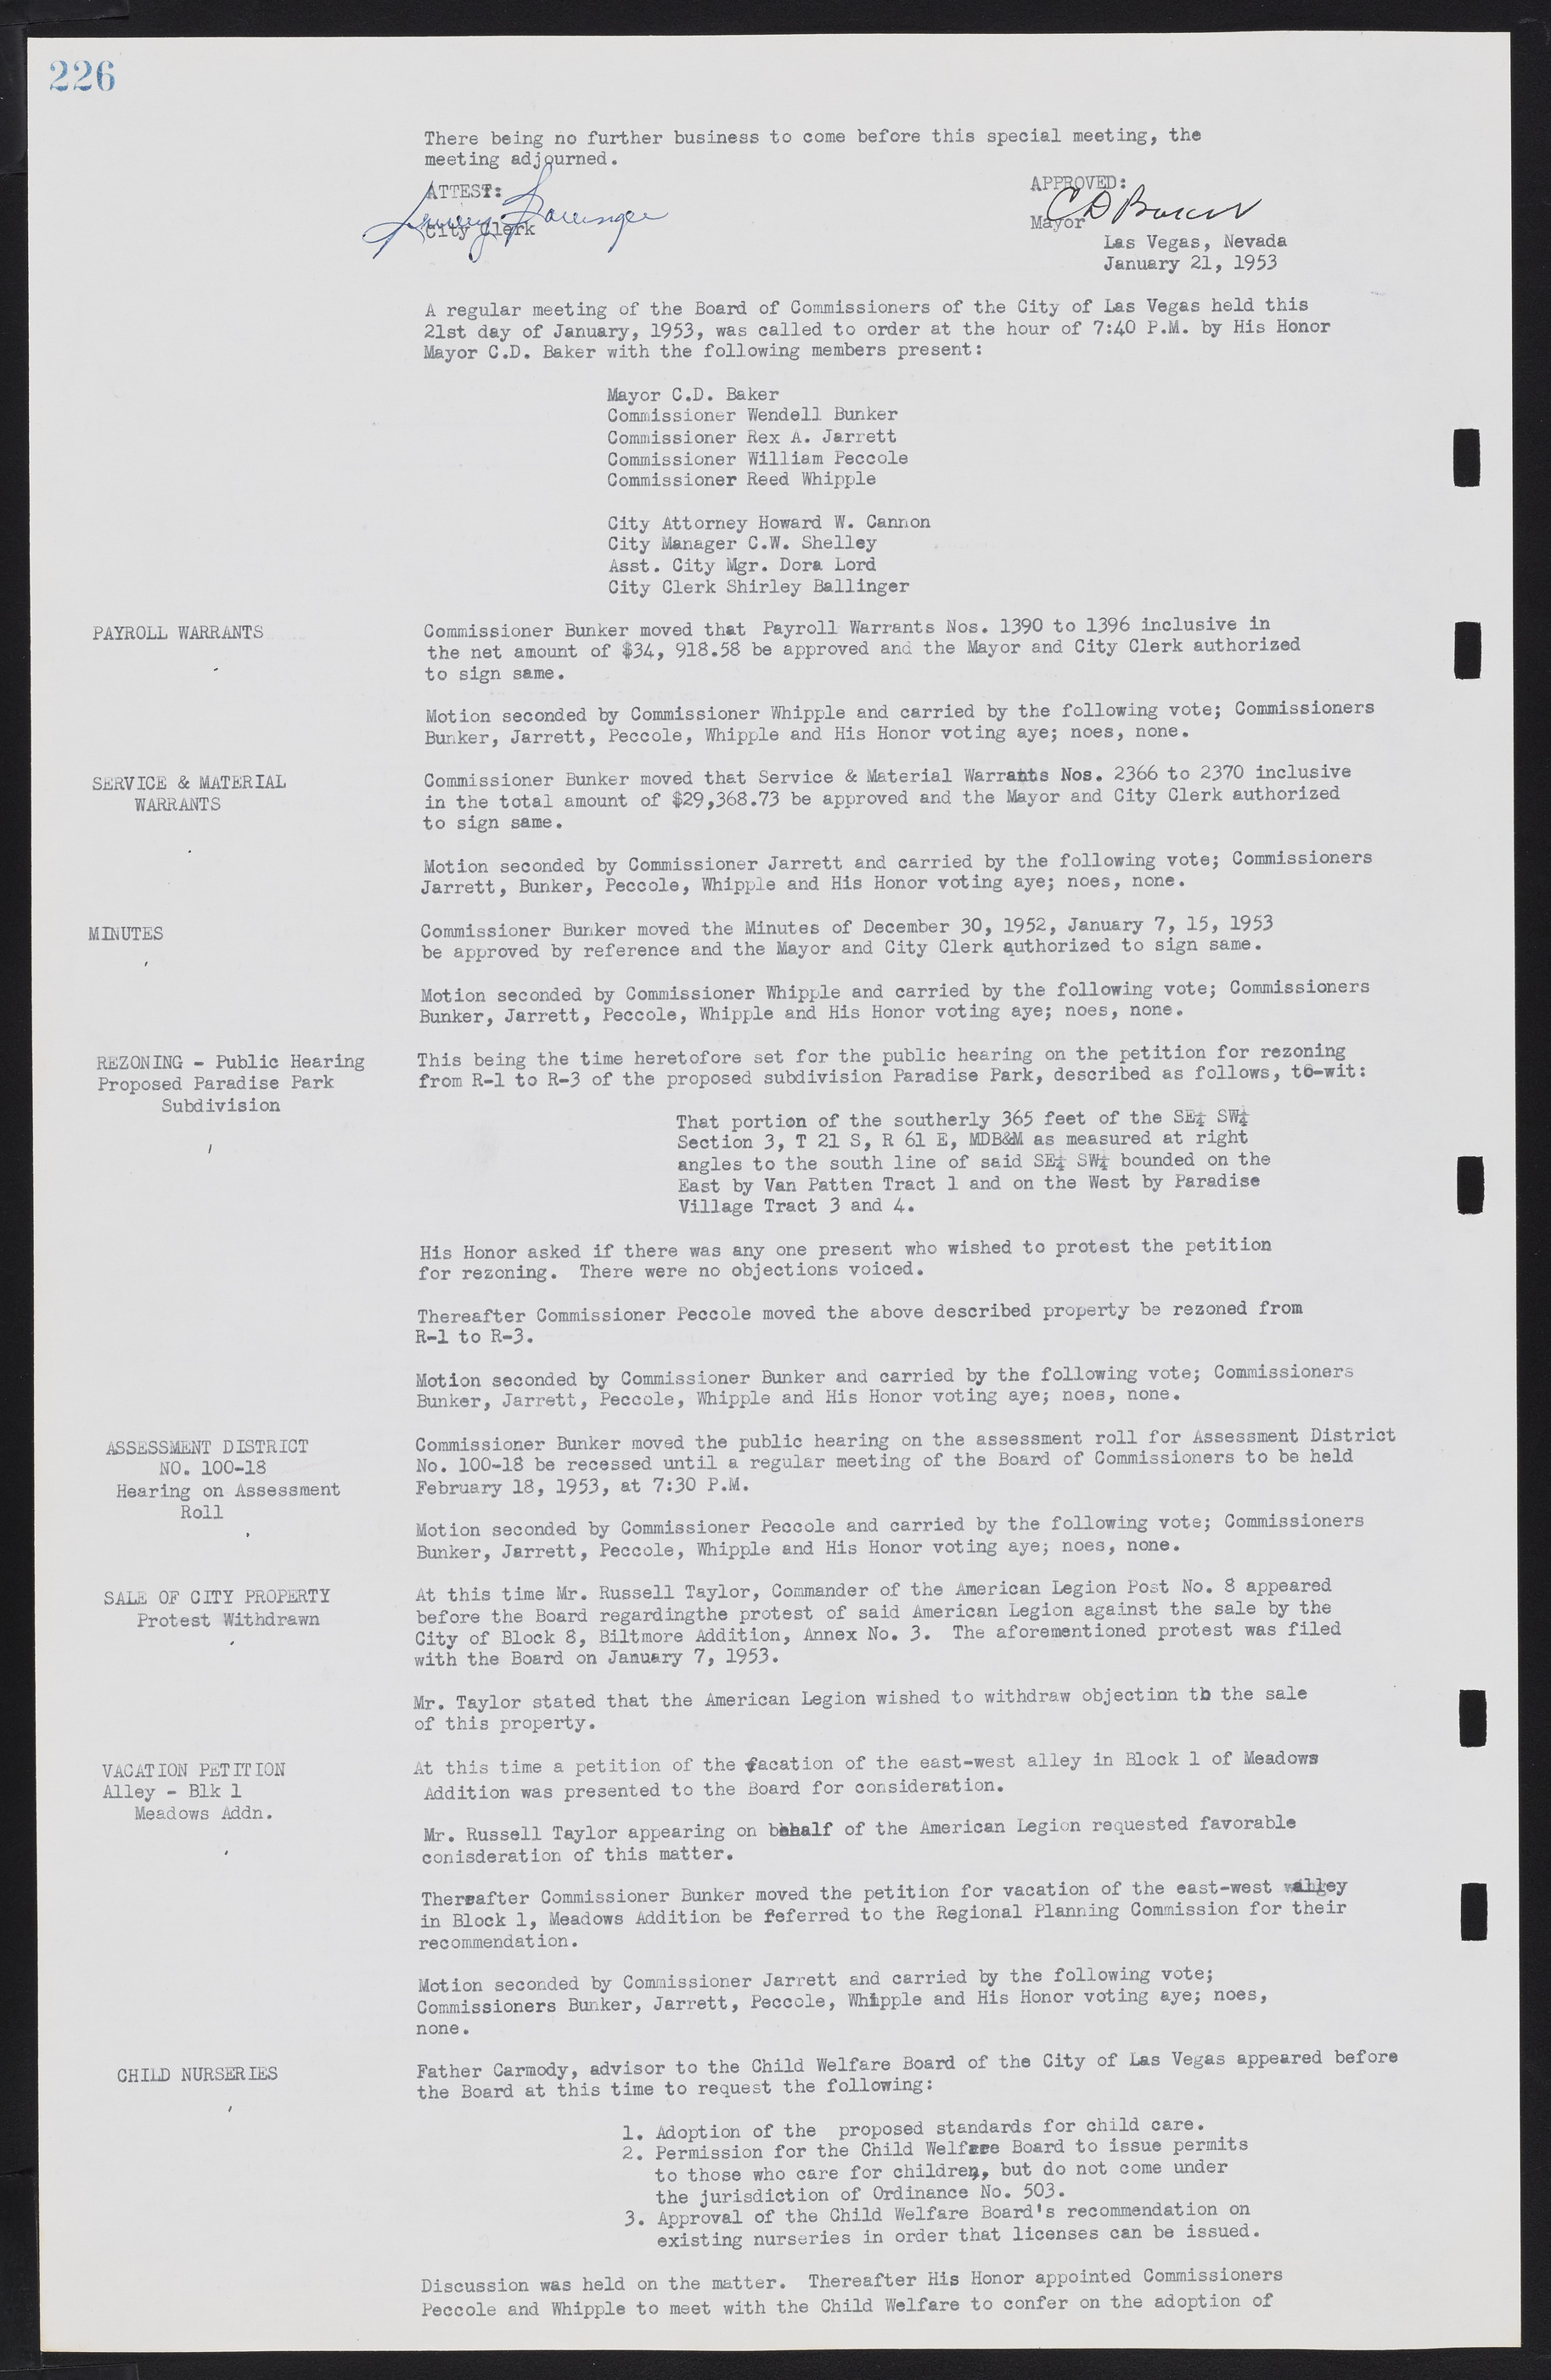 Las Vegas City Commission Minutes, May 26, 1952 to February 17, 1954, lvc000008-242